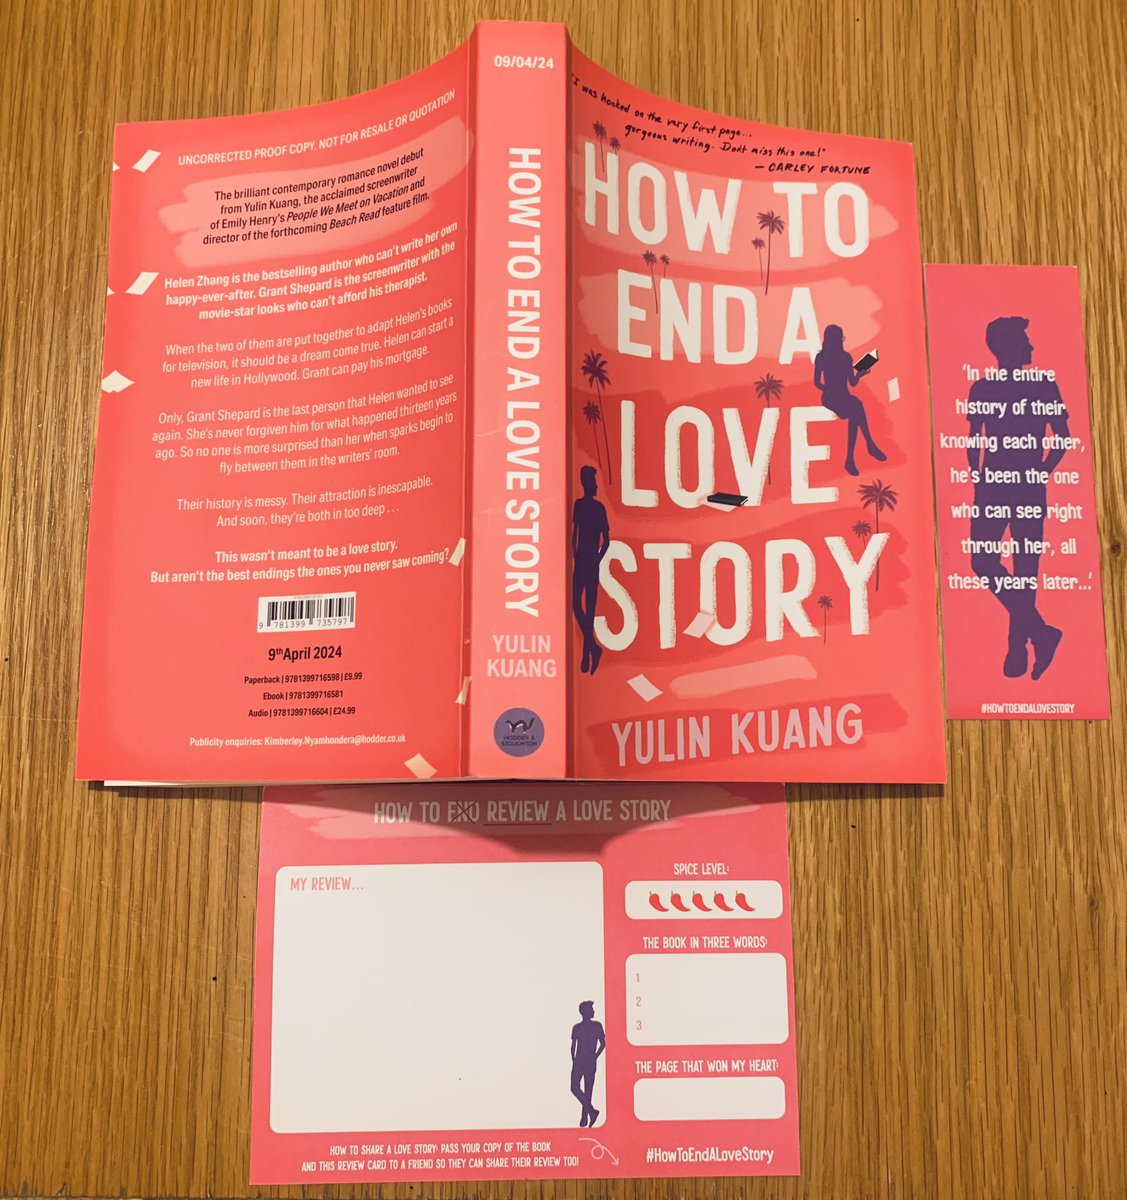 Huge thanks @TallulahLyons & @HodderFiction for this fabulous proof of #HowToEndALoveStory by #YulinKuang

Emily Henry describes it as, “one of the sexiest, smartest, funniest, and most effective novels…”

I can’t wait to read it! 

❣️ Out 9th April ❣️

#booktwitter